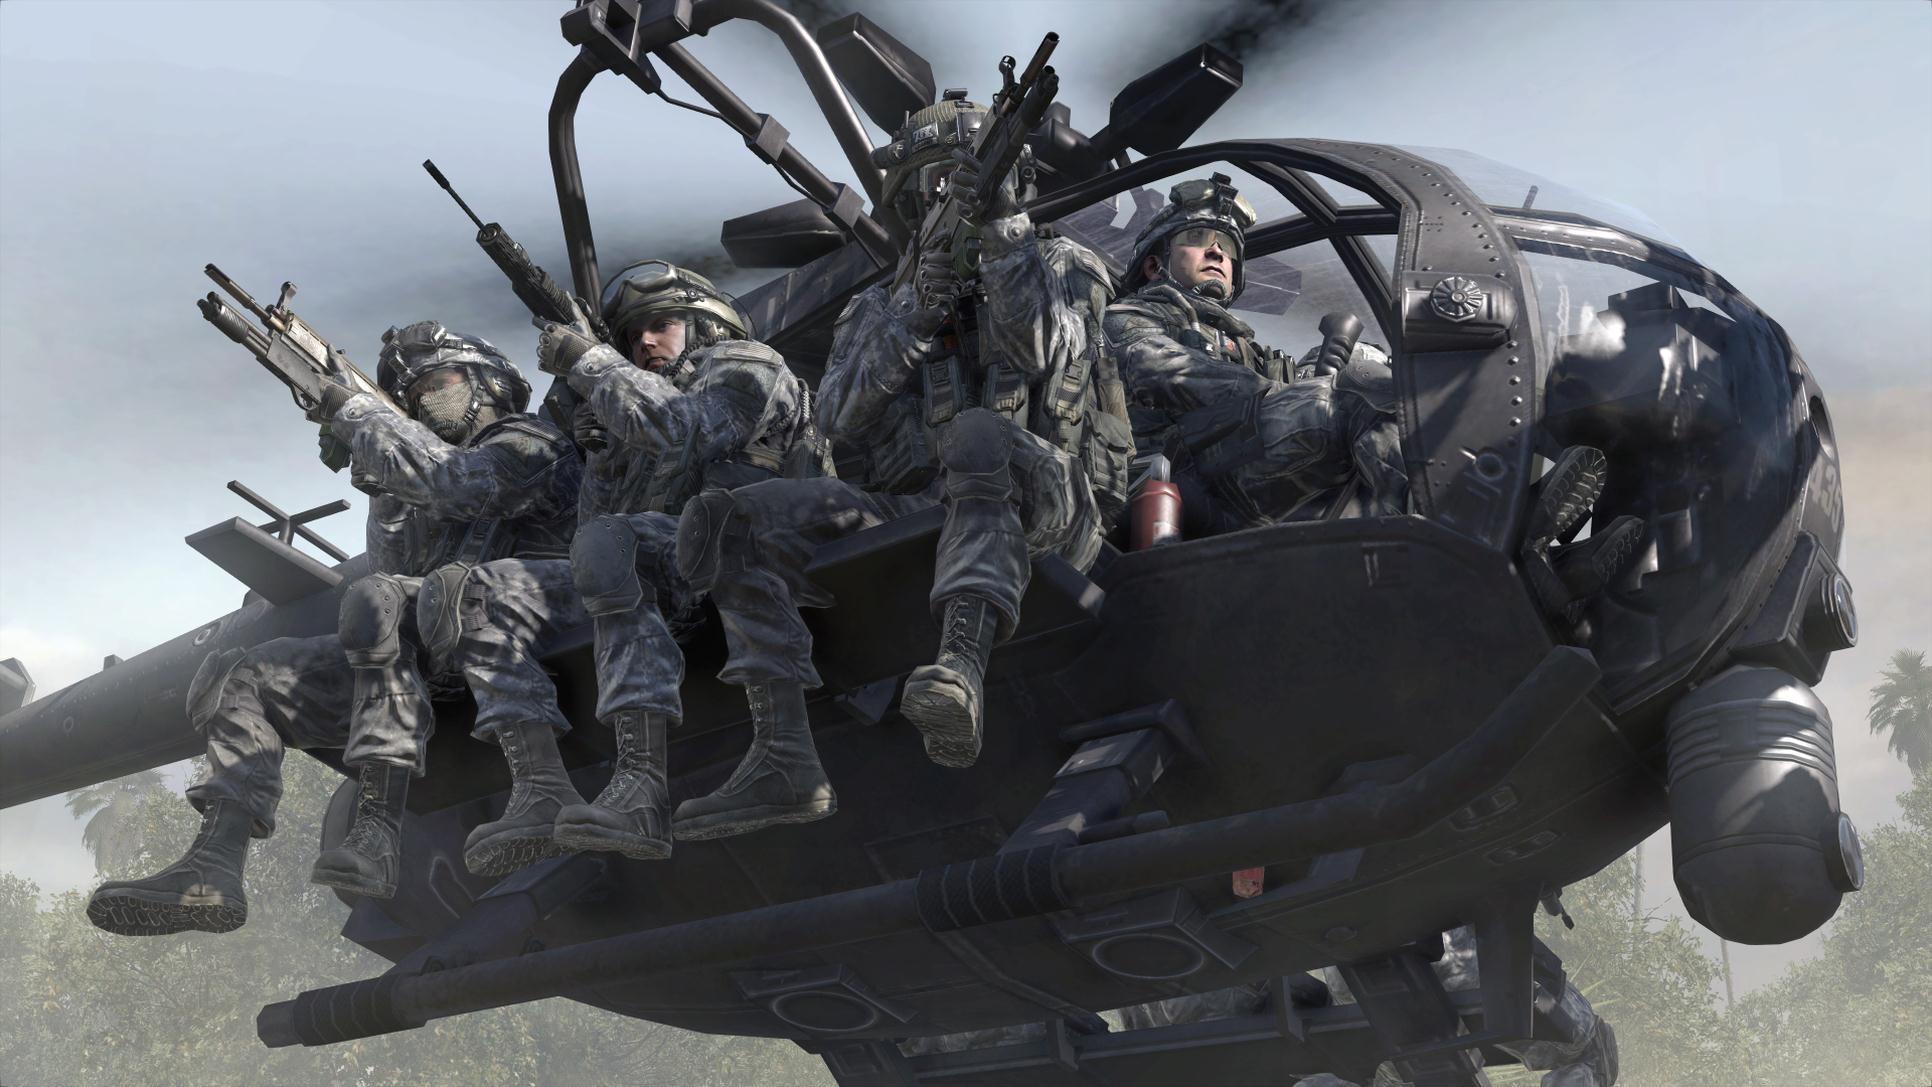 Army Ranger 1080p Other LocaLwom Wallpaper Wp6202529